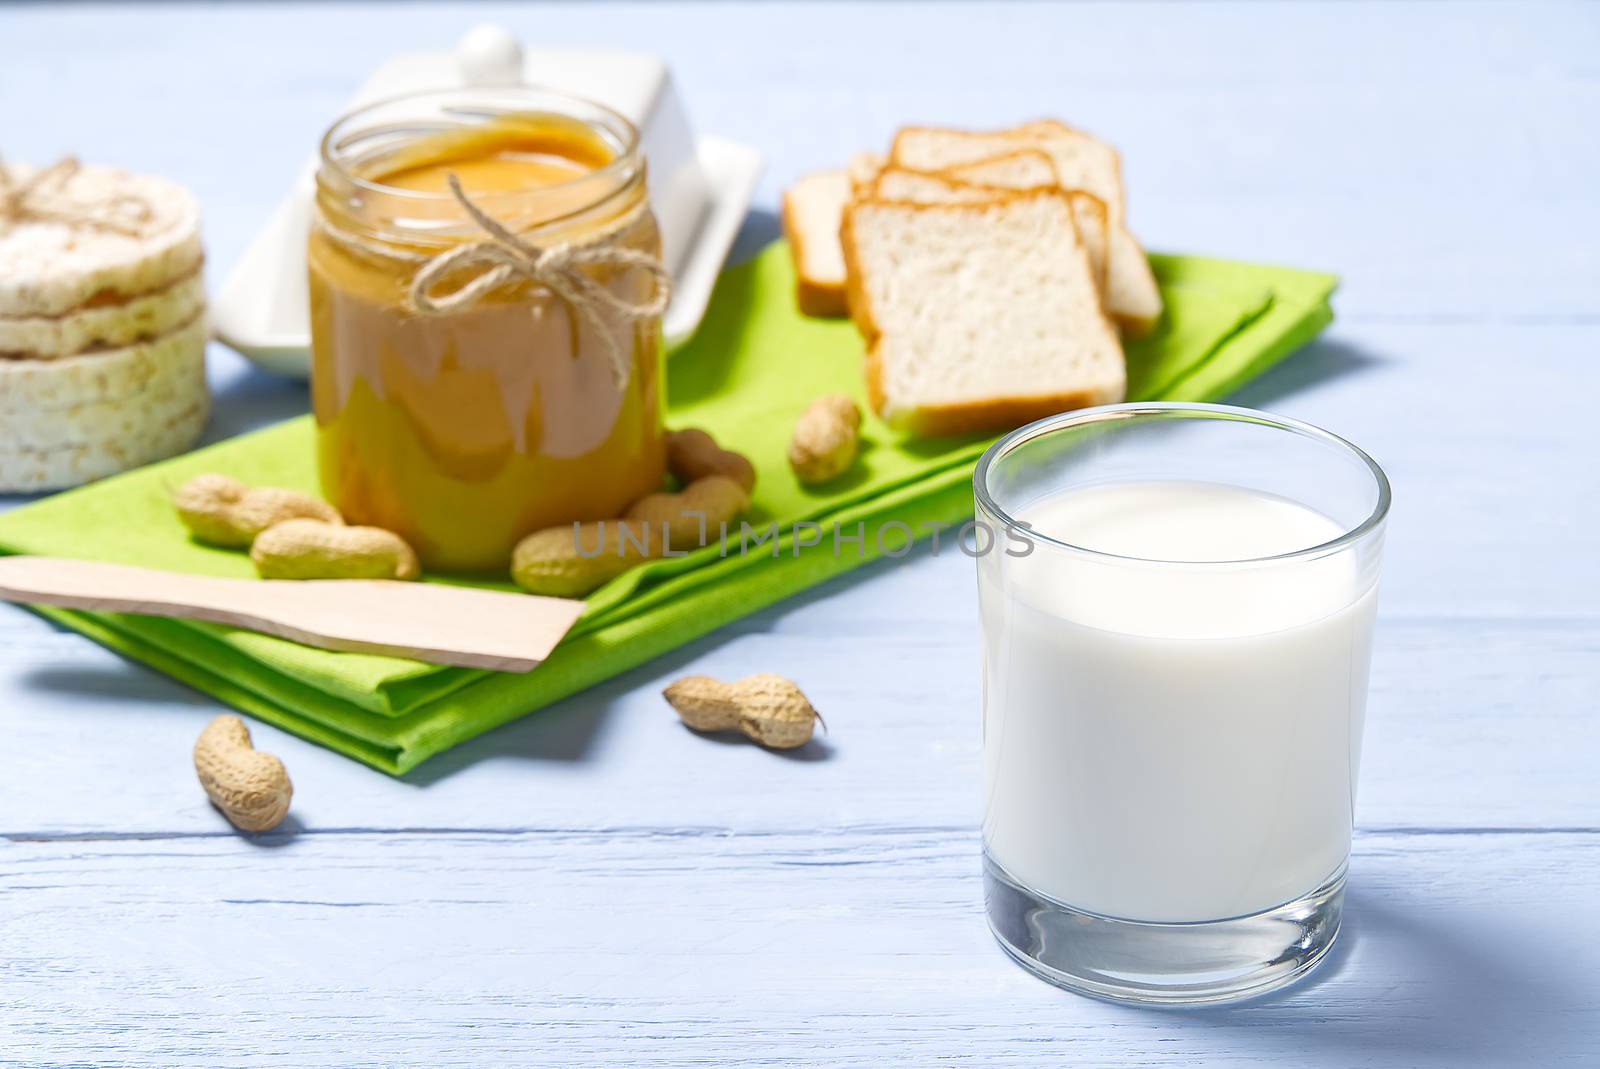 american breakfast milk and peanut butter. Peanut butter, white bread with glass of milk on blue wooden background